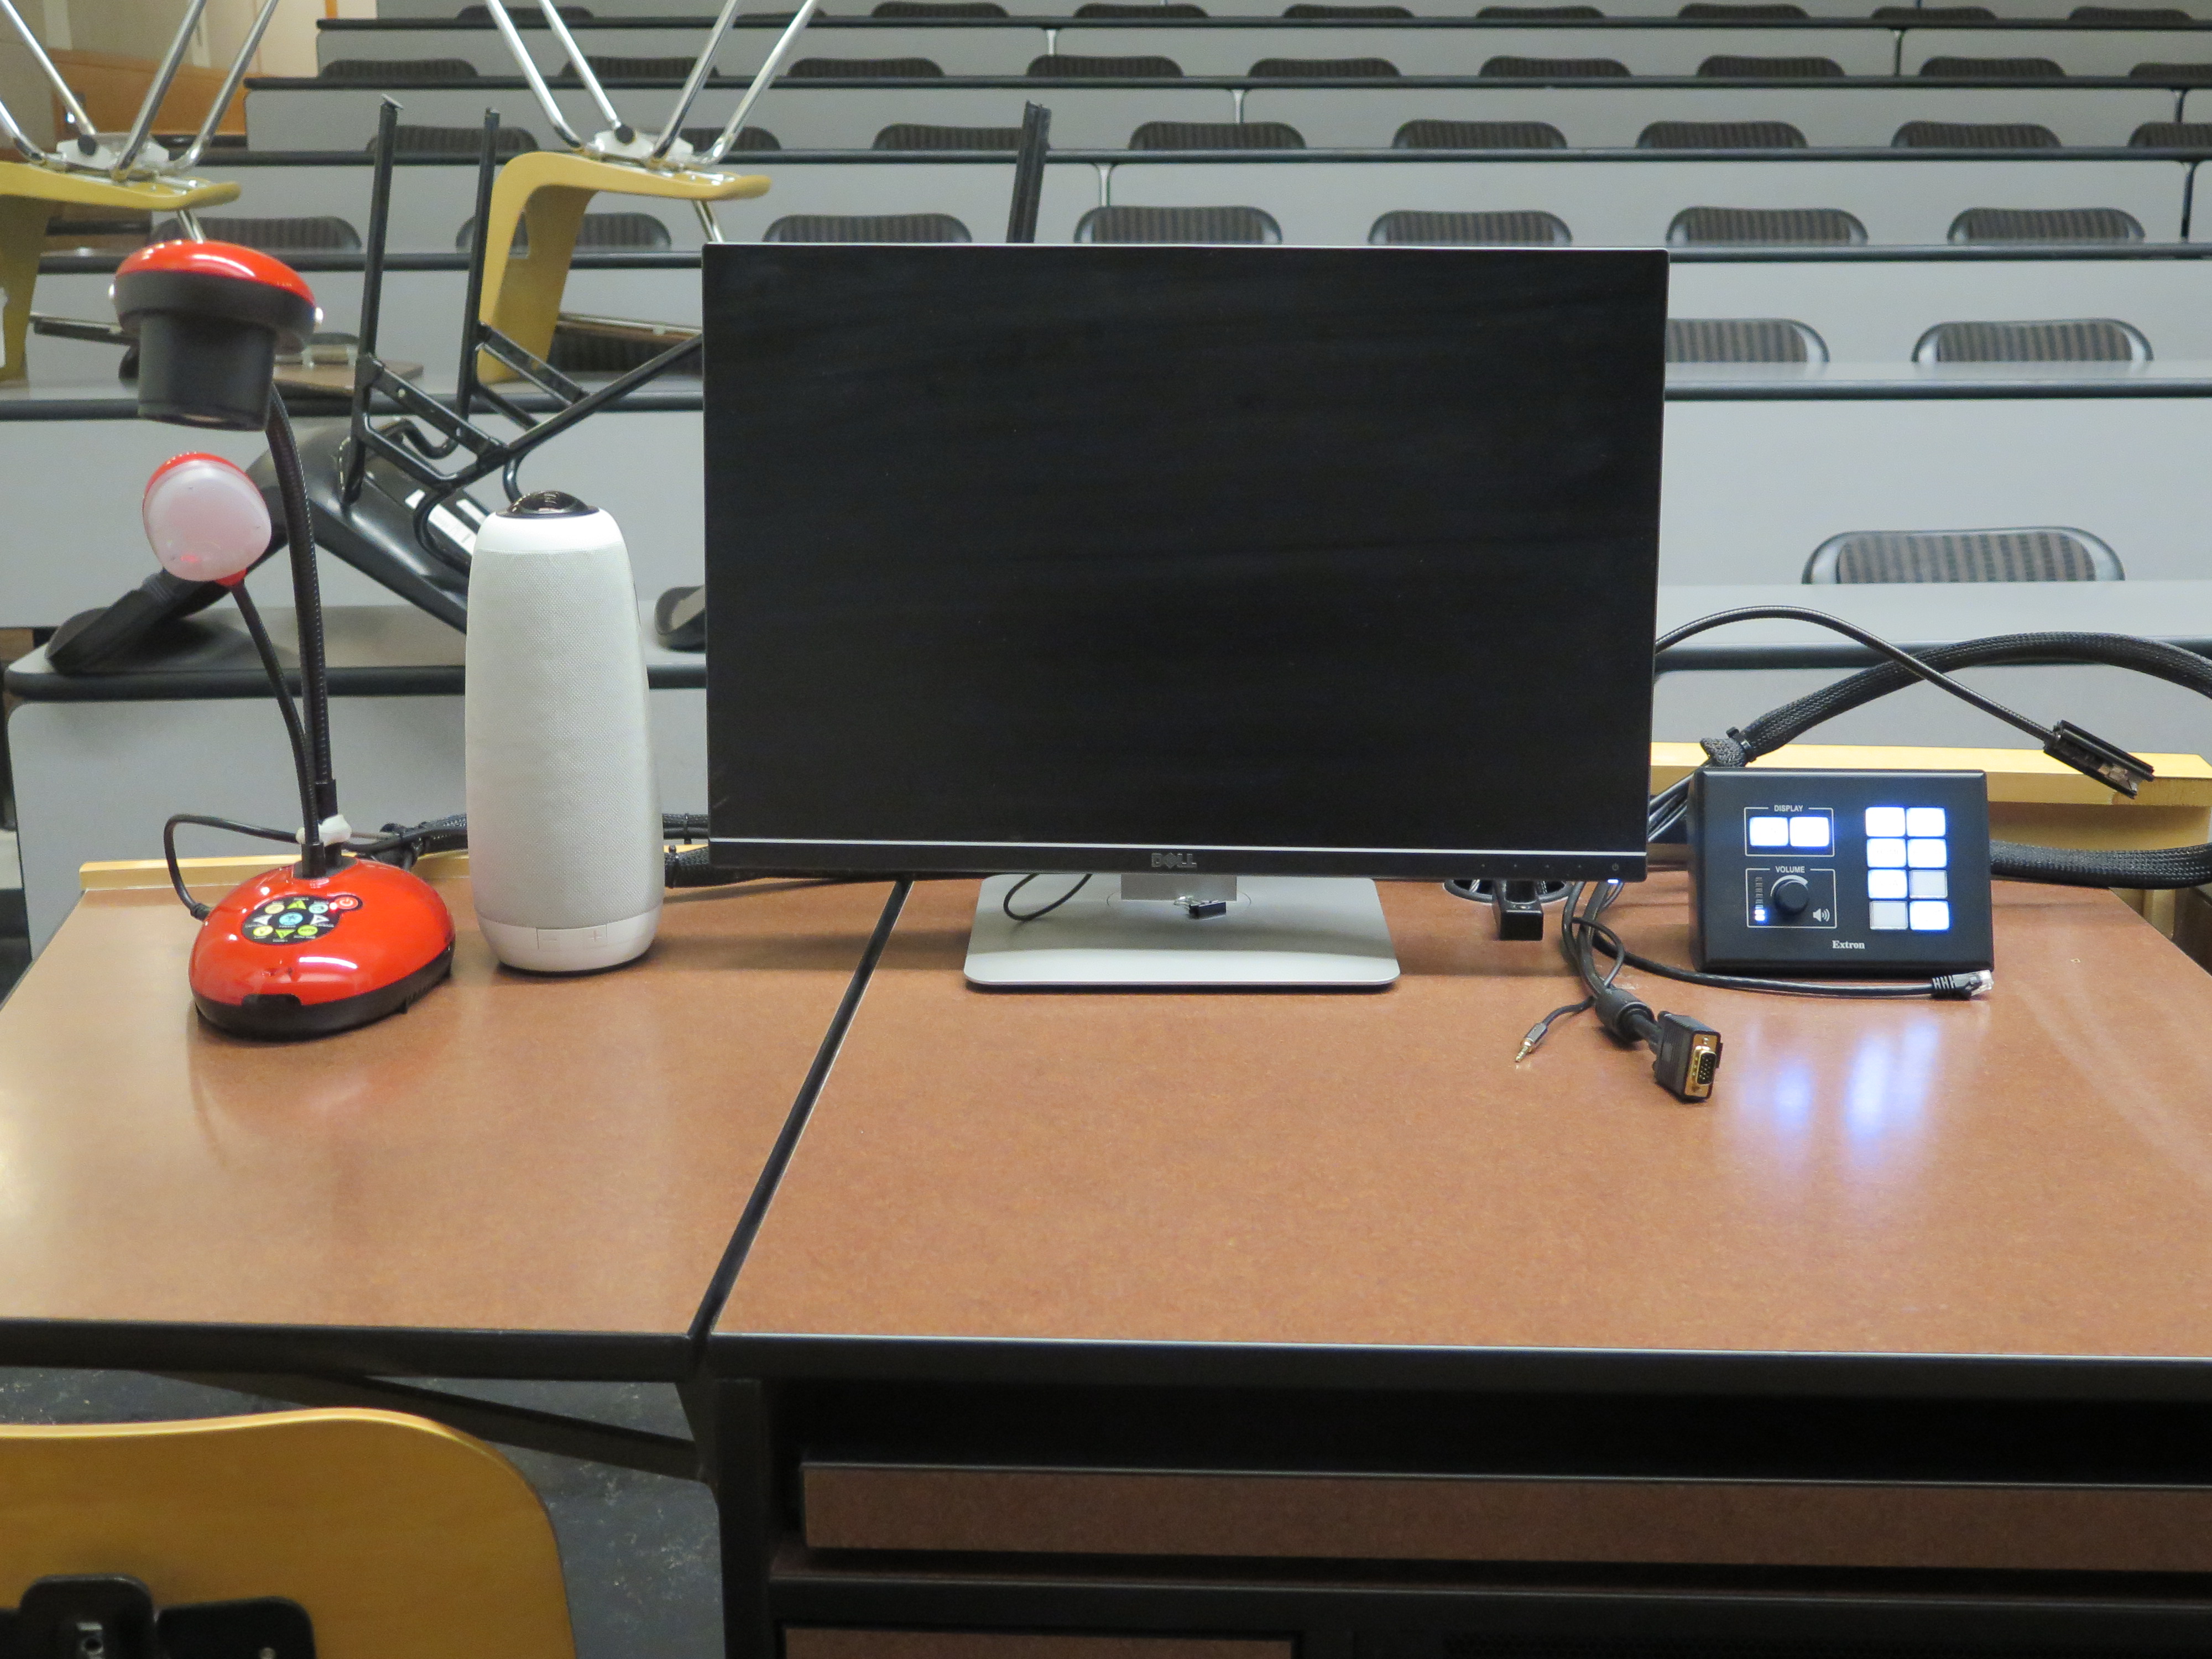 On top of Podium is Owl Camera, Dell Computer Monitor, AV Push Button Controller, and Lumens Ladybug Document Camera.